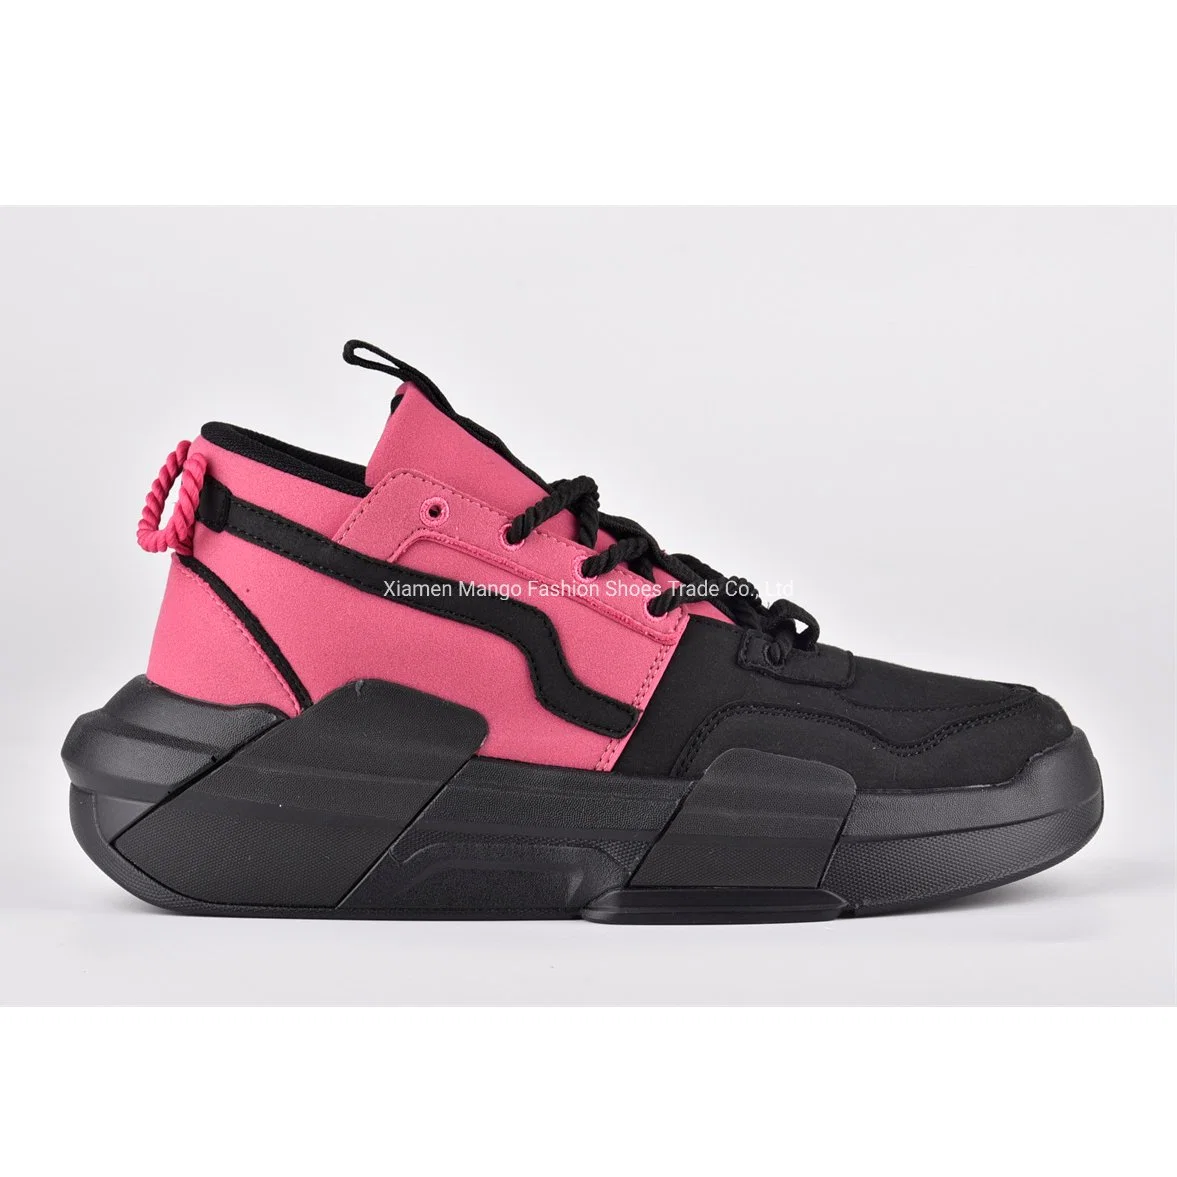 Women Skating Shoes Platform Sneaker Lace-up Trainers Skate Shoes